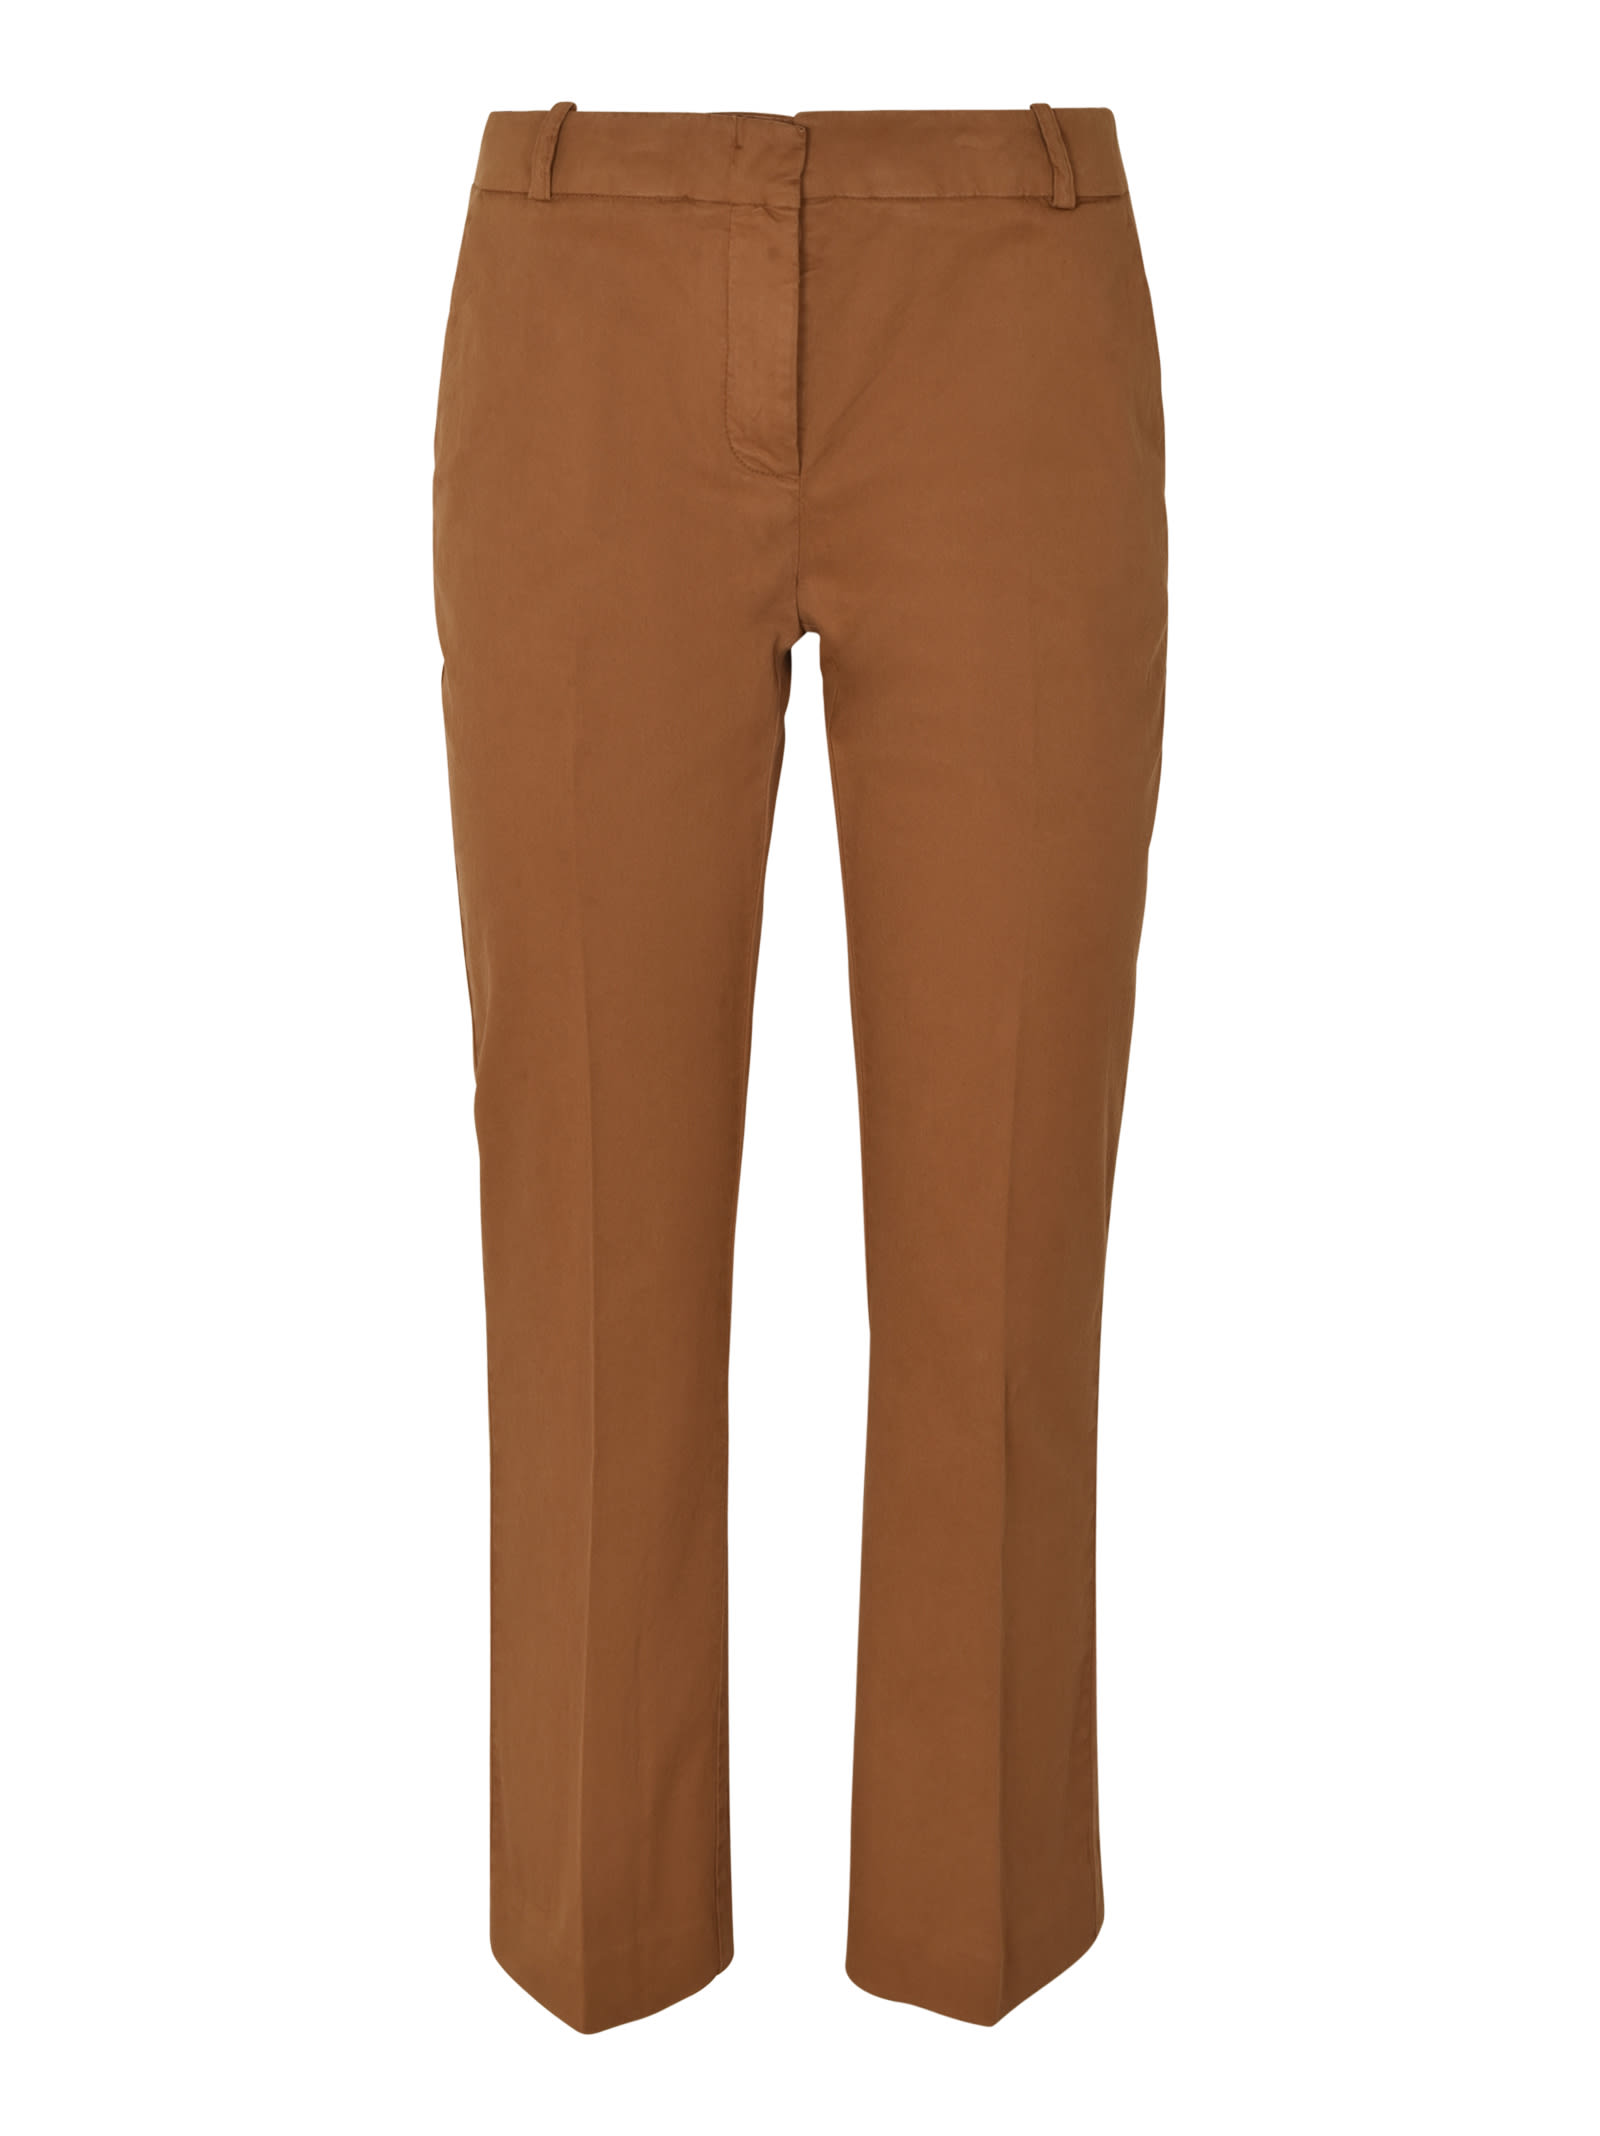 KILTIE CONCEALED TROUSERS